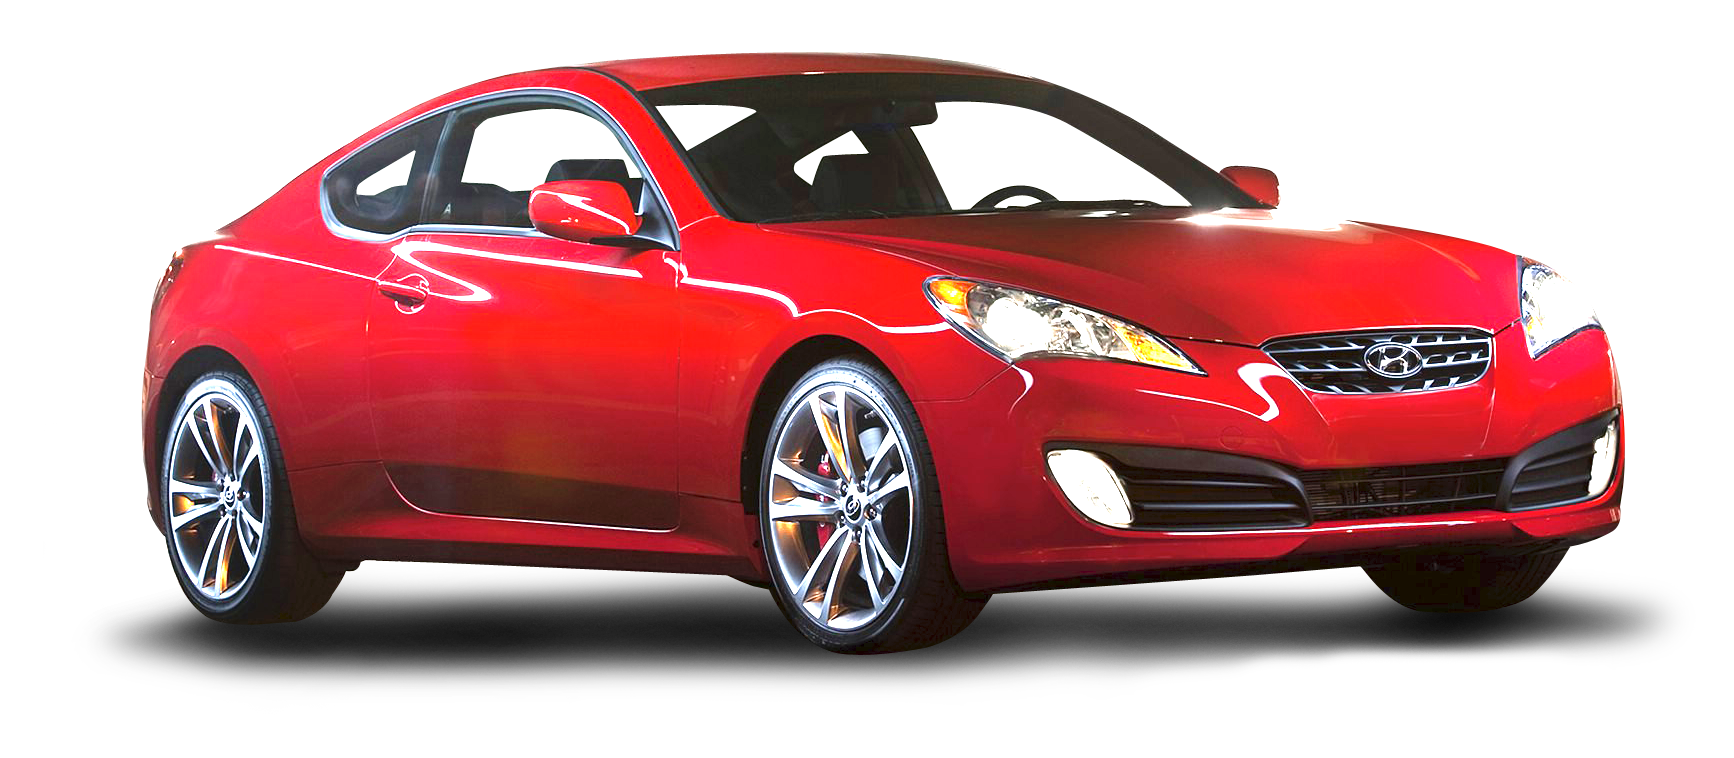 A Red Car With Its Headlights On